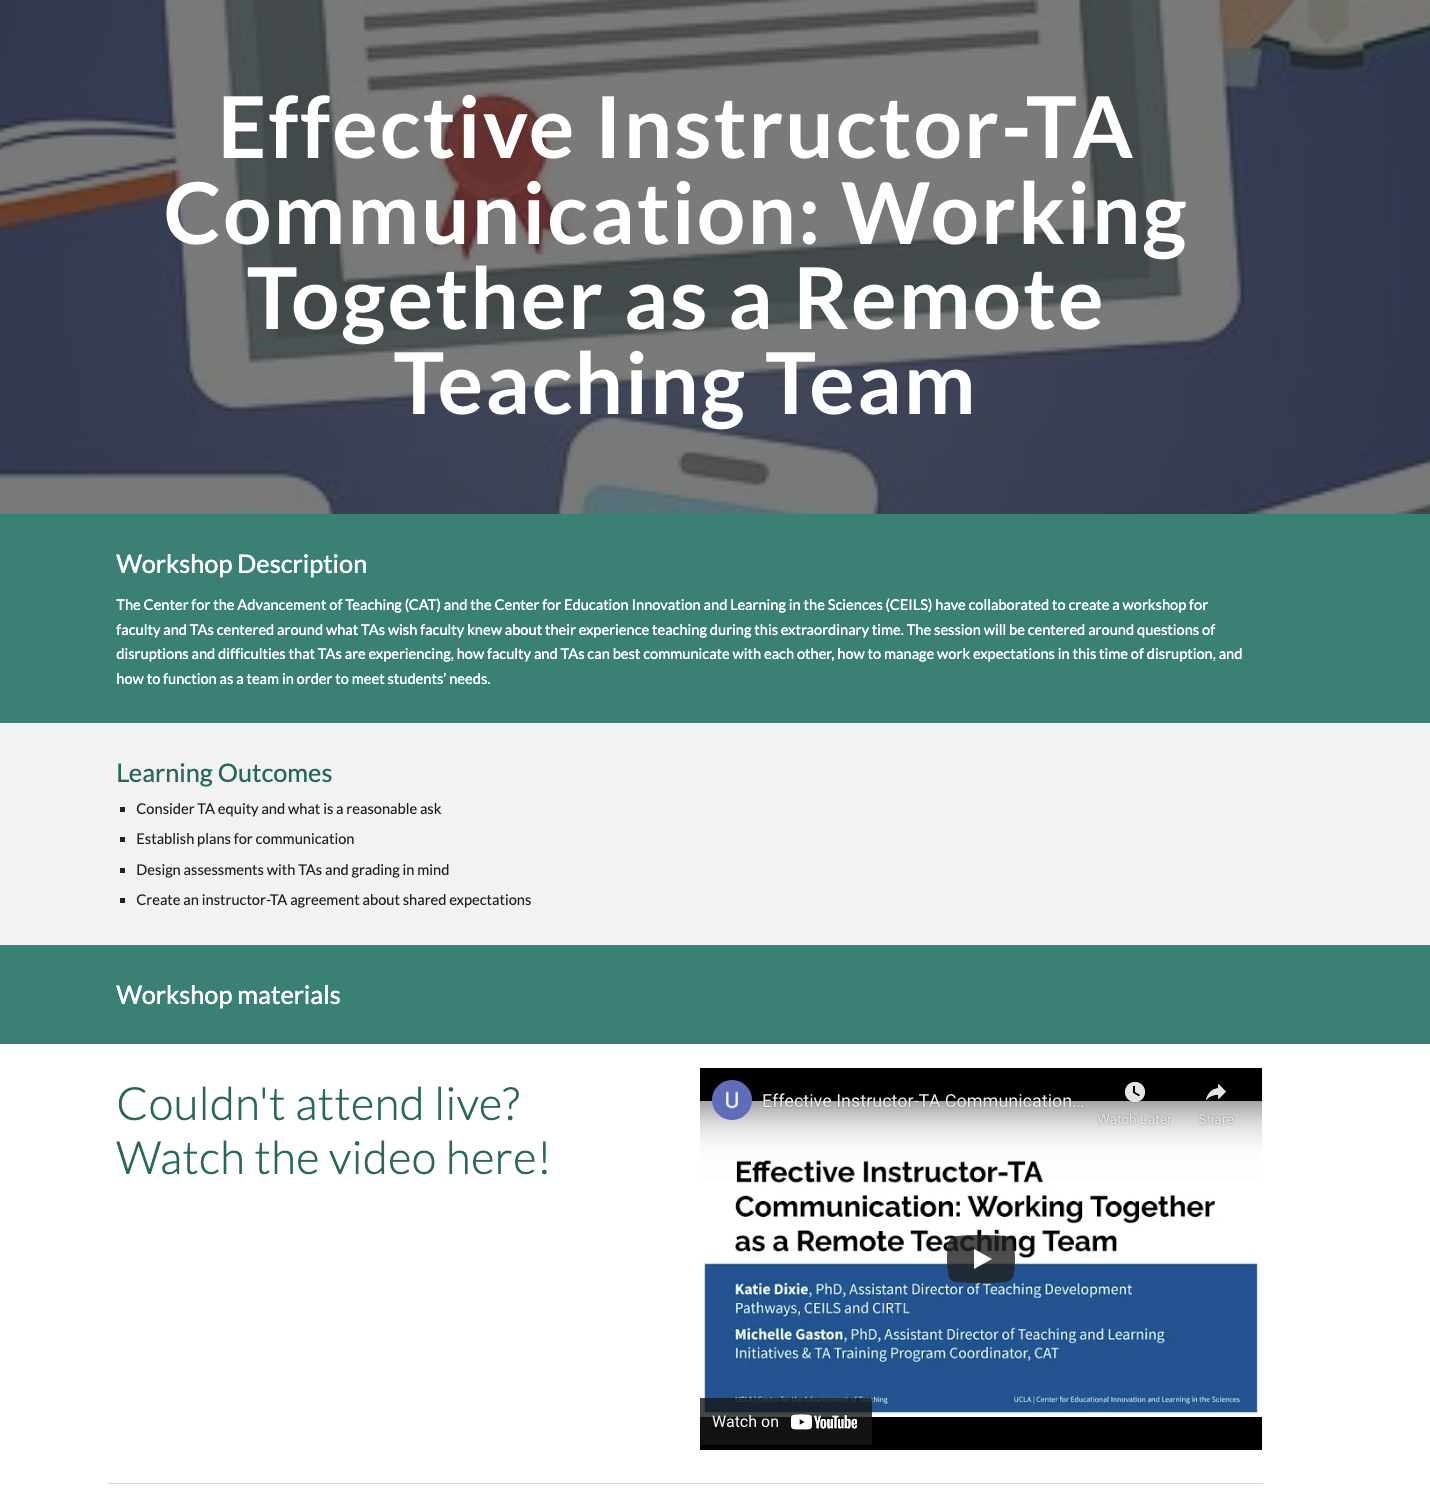 Screenshot of the website for effective instructor-TA communication